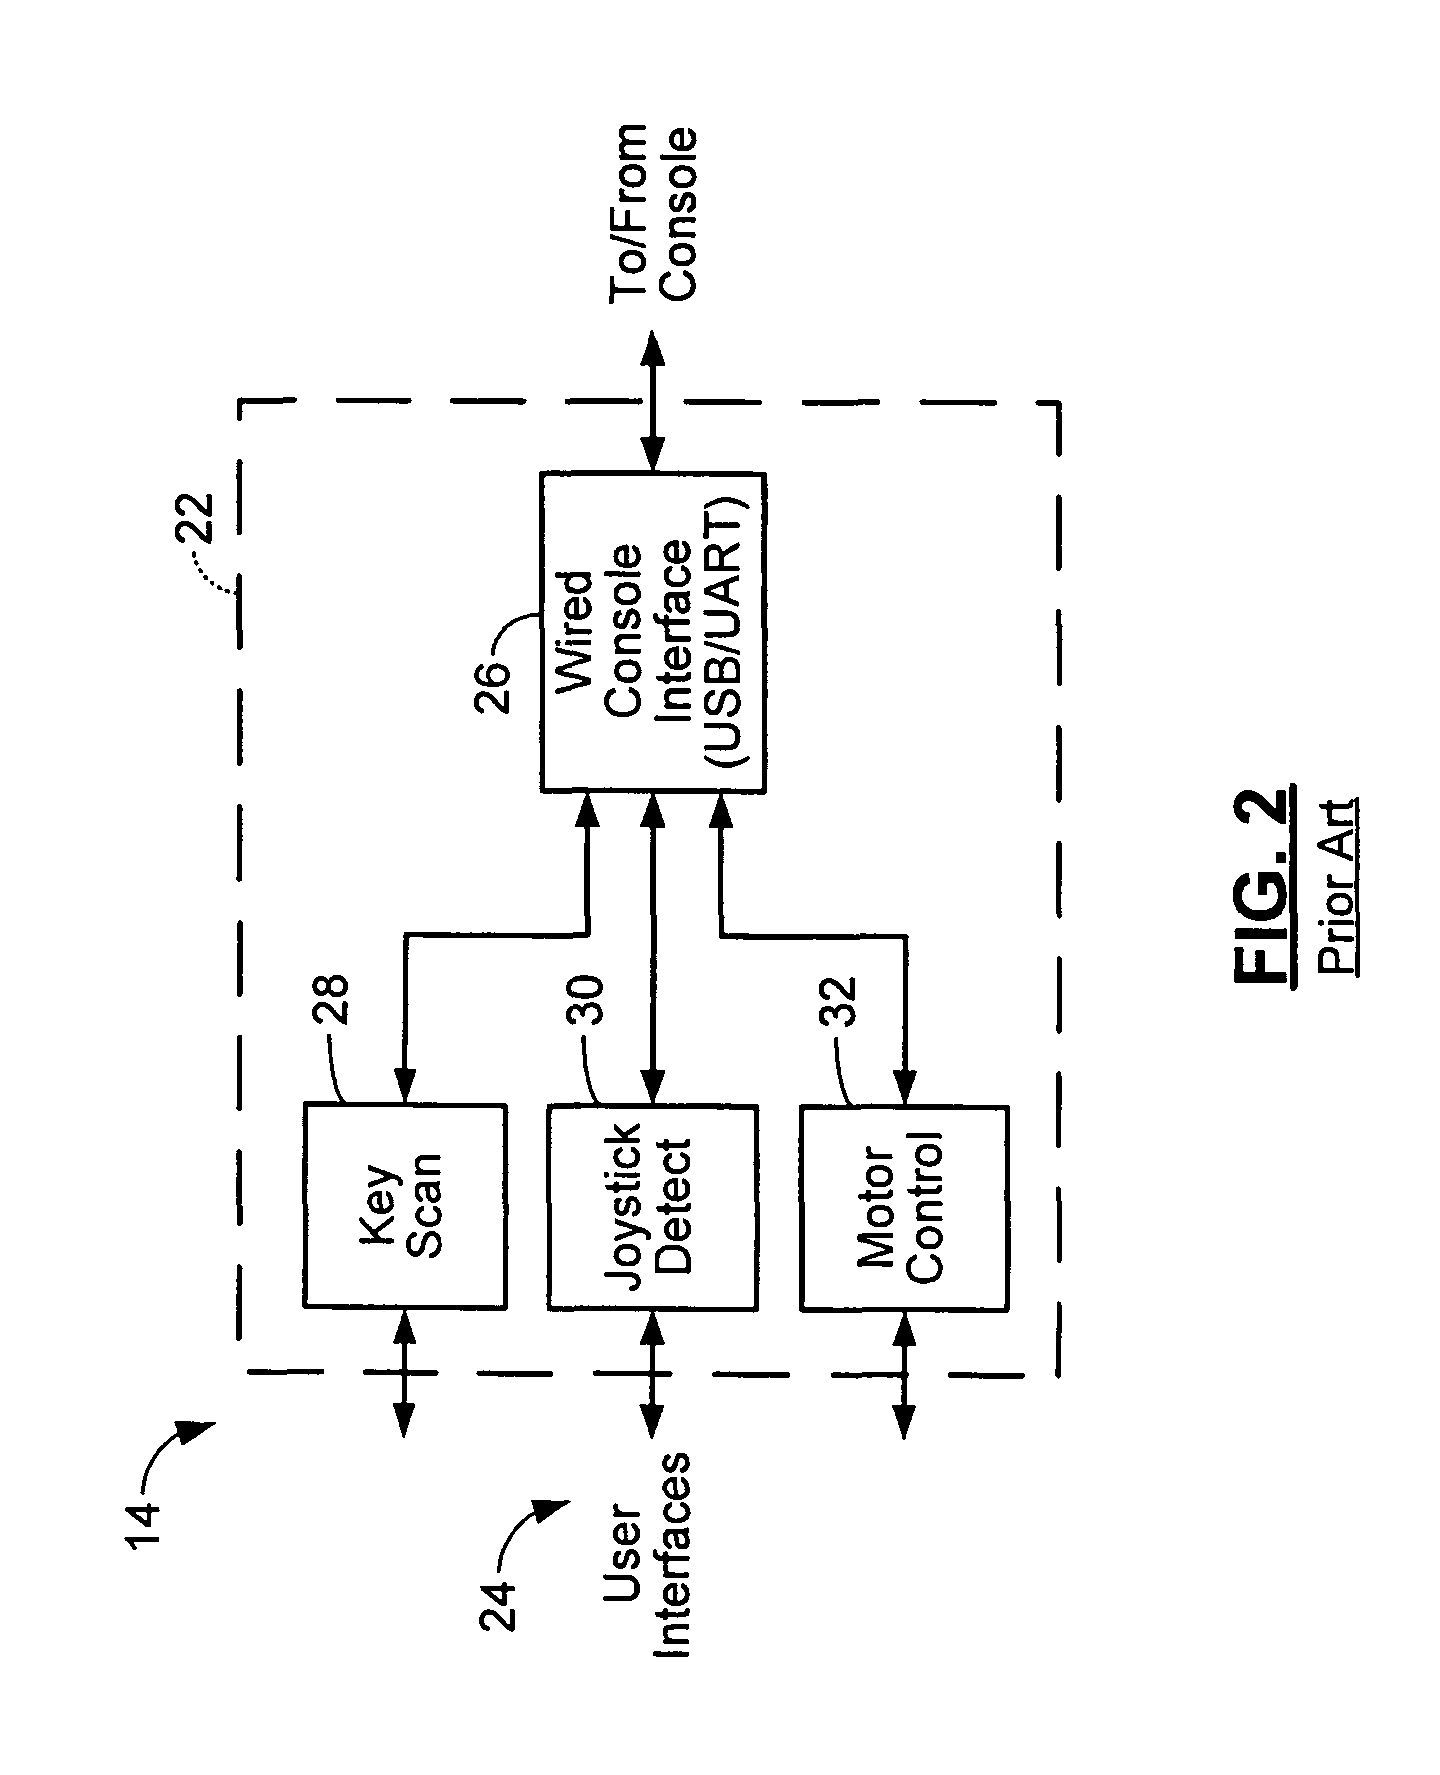 Wireless local area network infrastructure mode for reducing power consumption